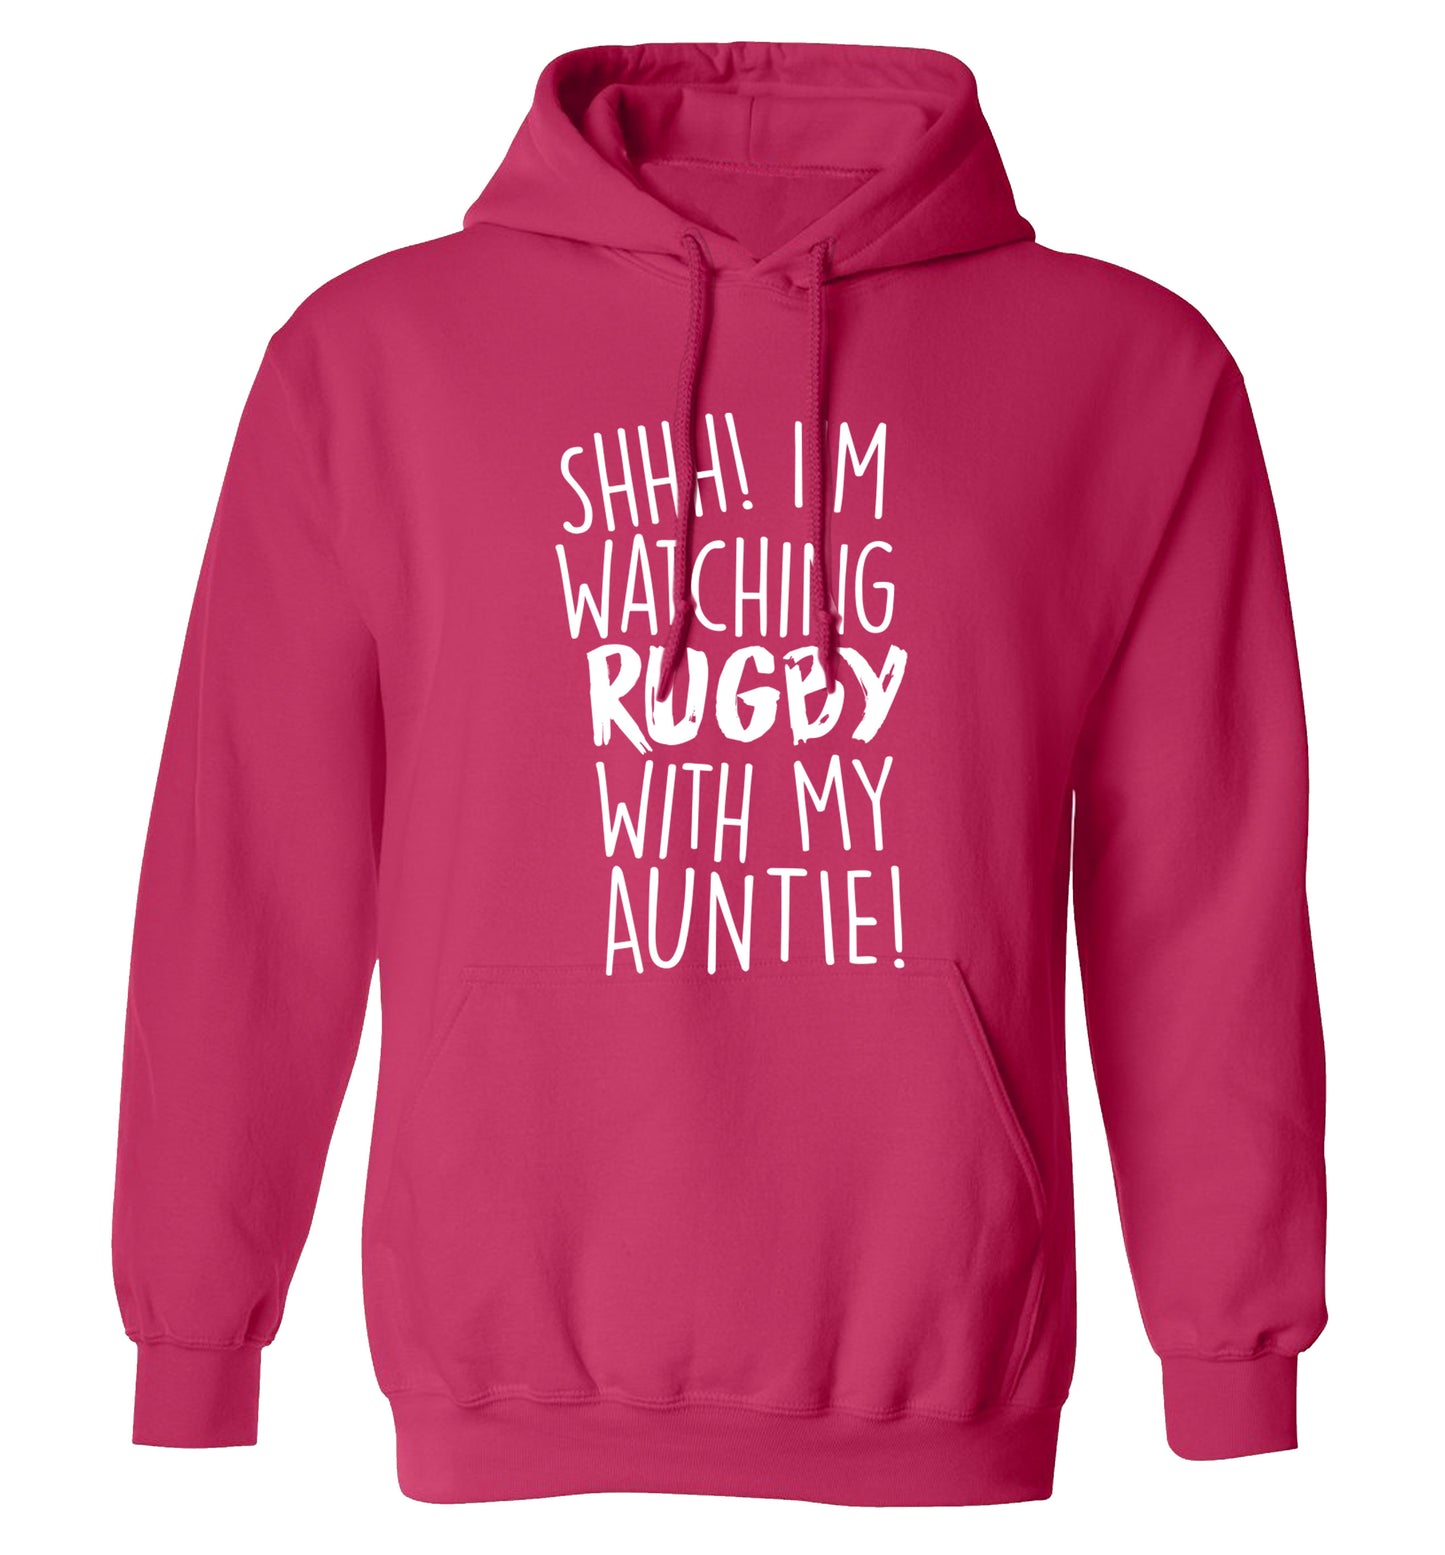 Shhh I'm watchin rugby with my auntie adults unisex pink hoodie 2XL